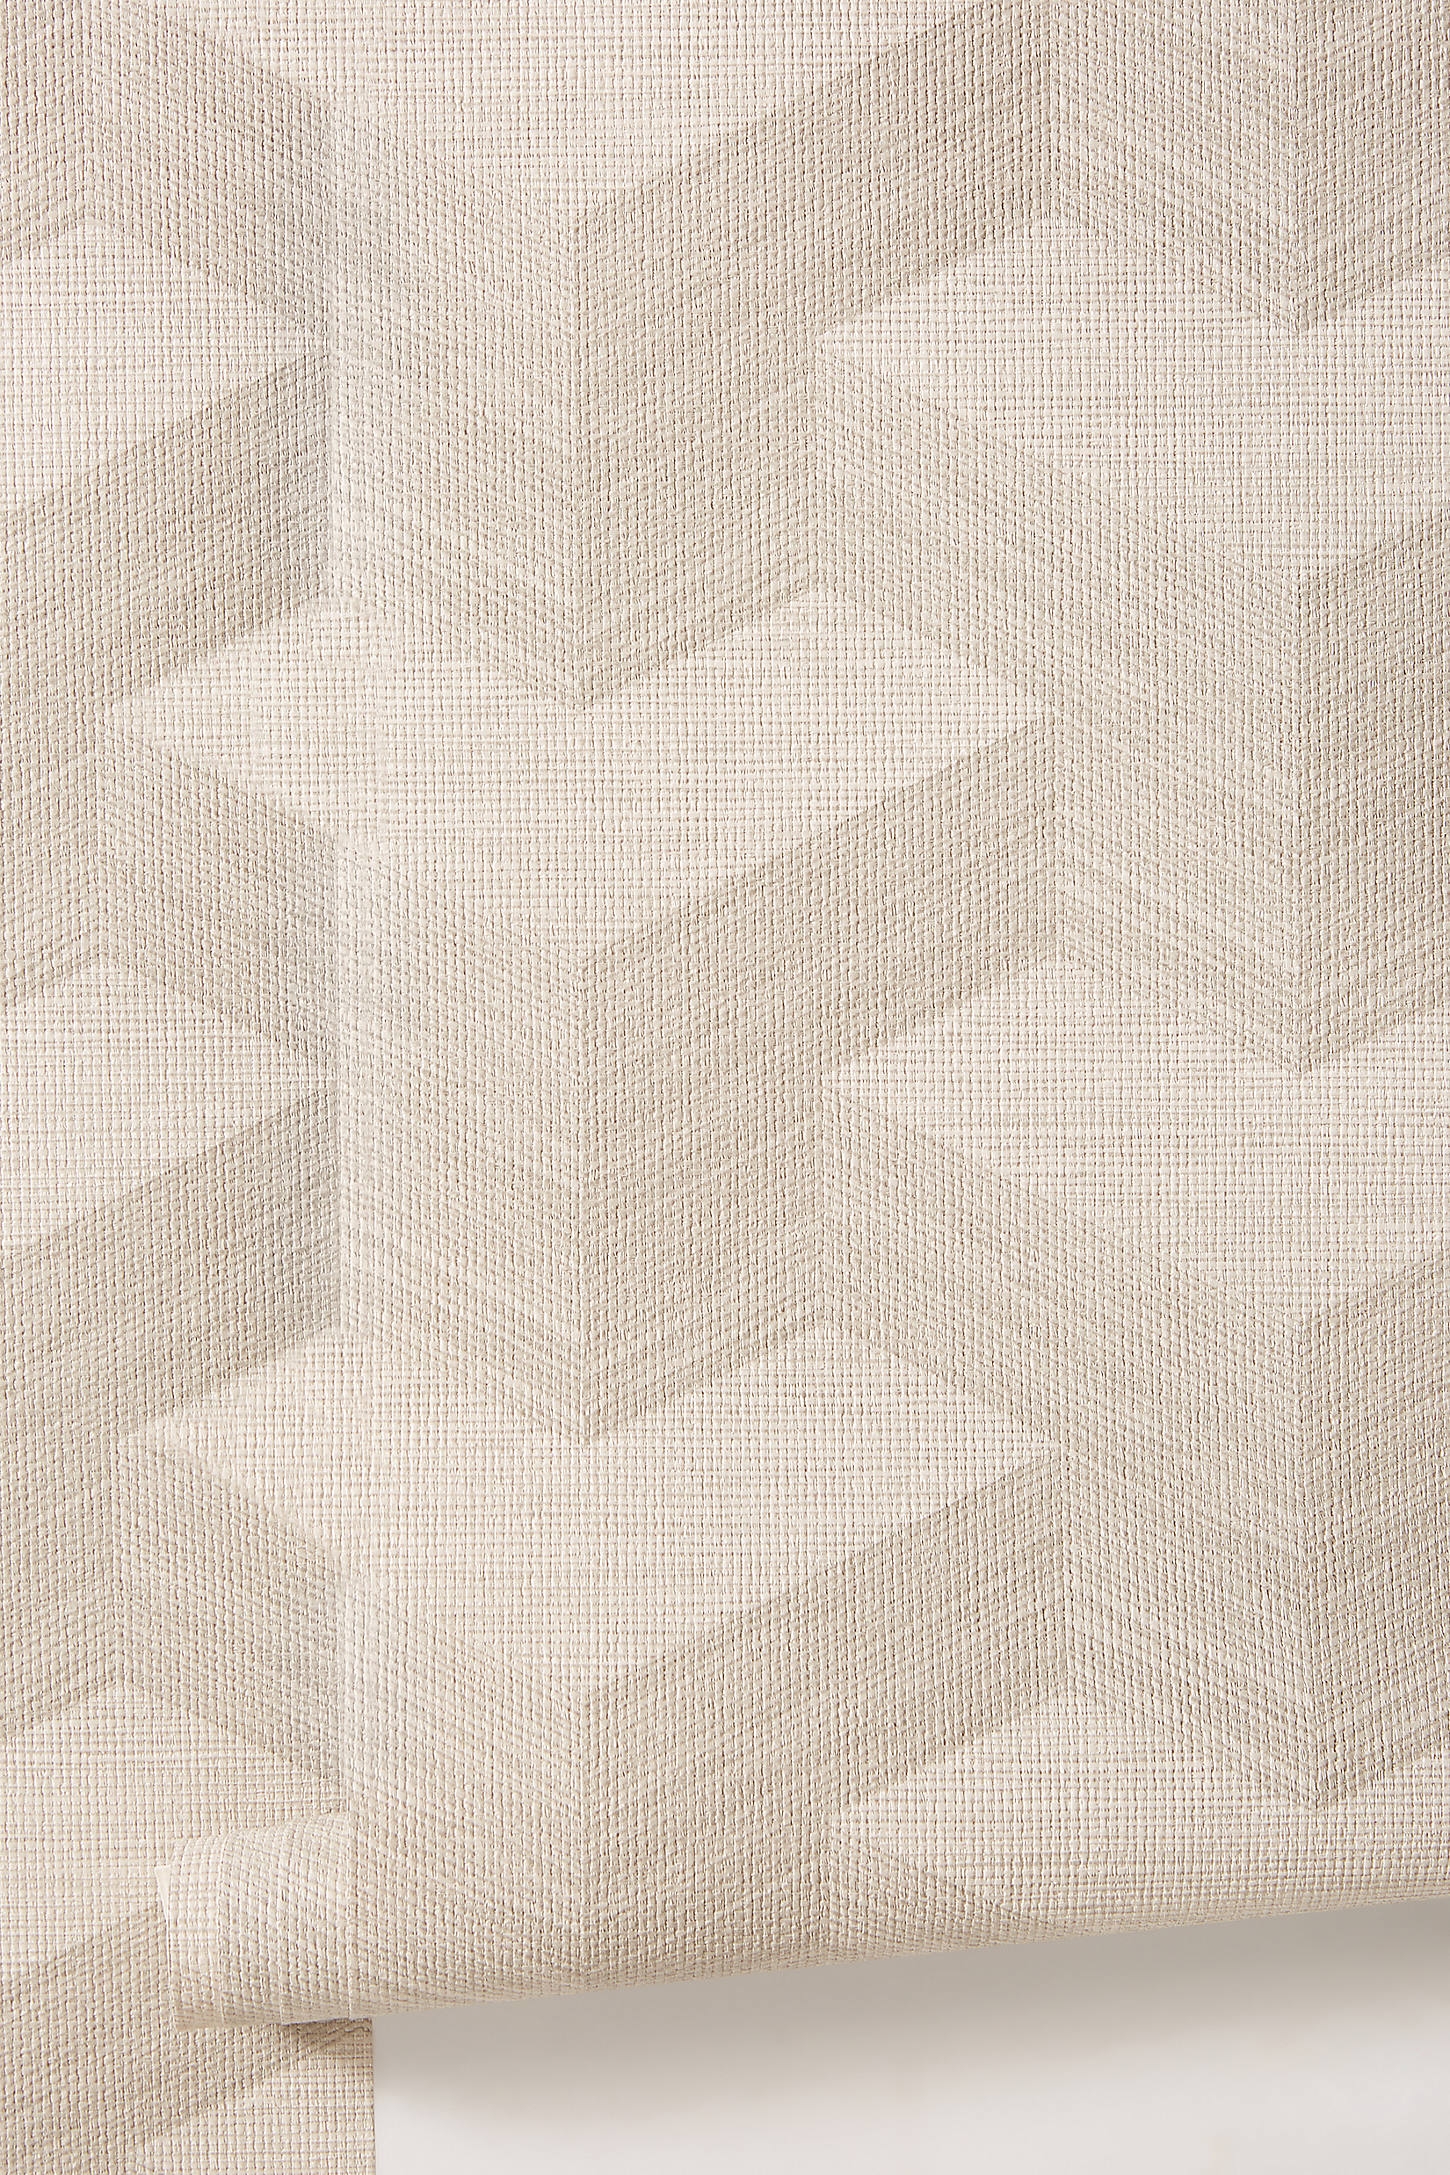 Geo Textured Wallpaper By Anthropologie in Grey - Image 0